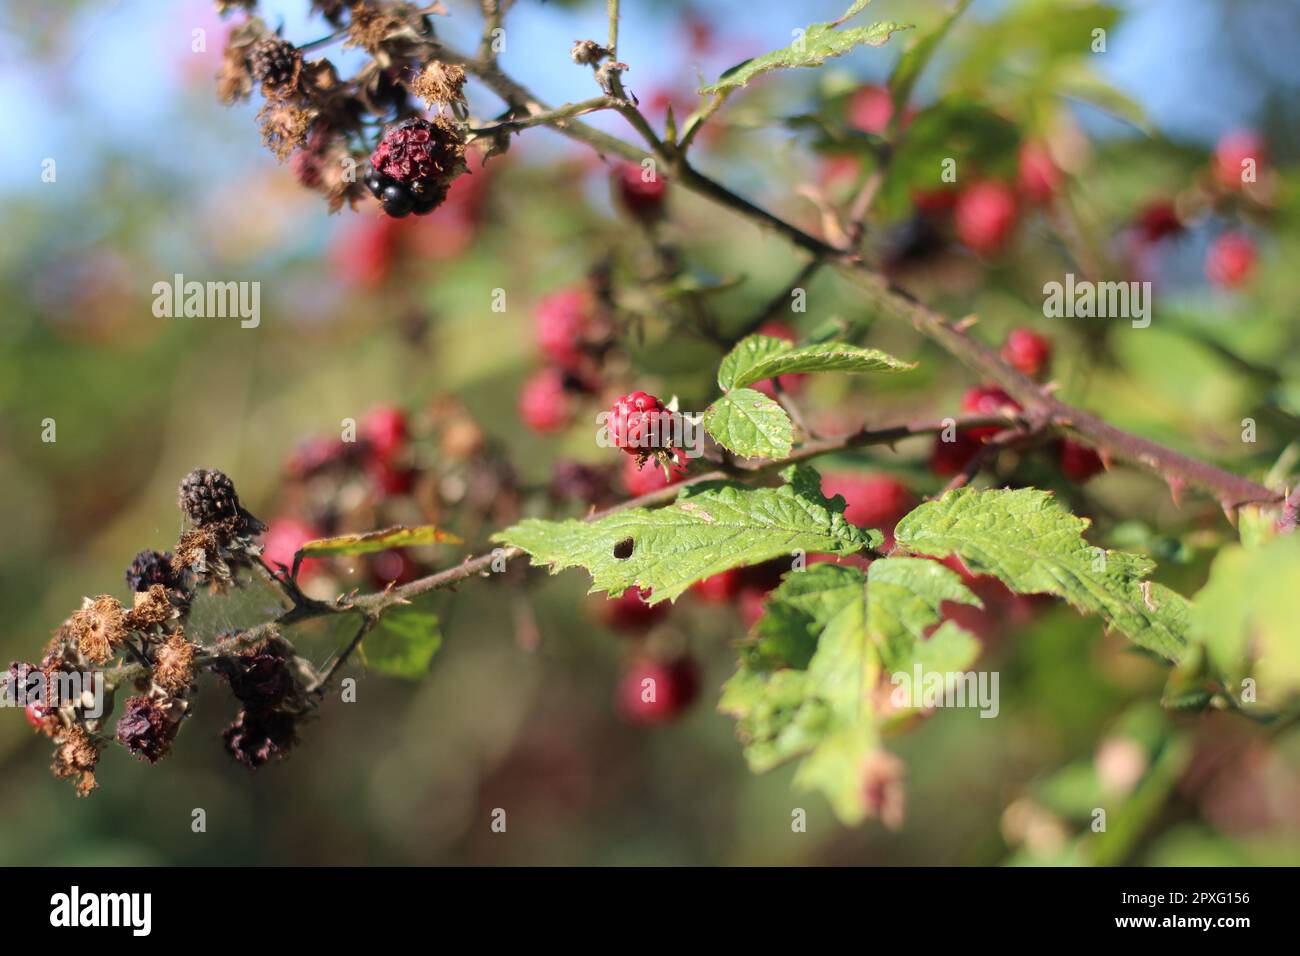 Branch of black raspberry or blackberry with unripe red and ripe black berries on a green bush background im Sauerland Stock Photo